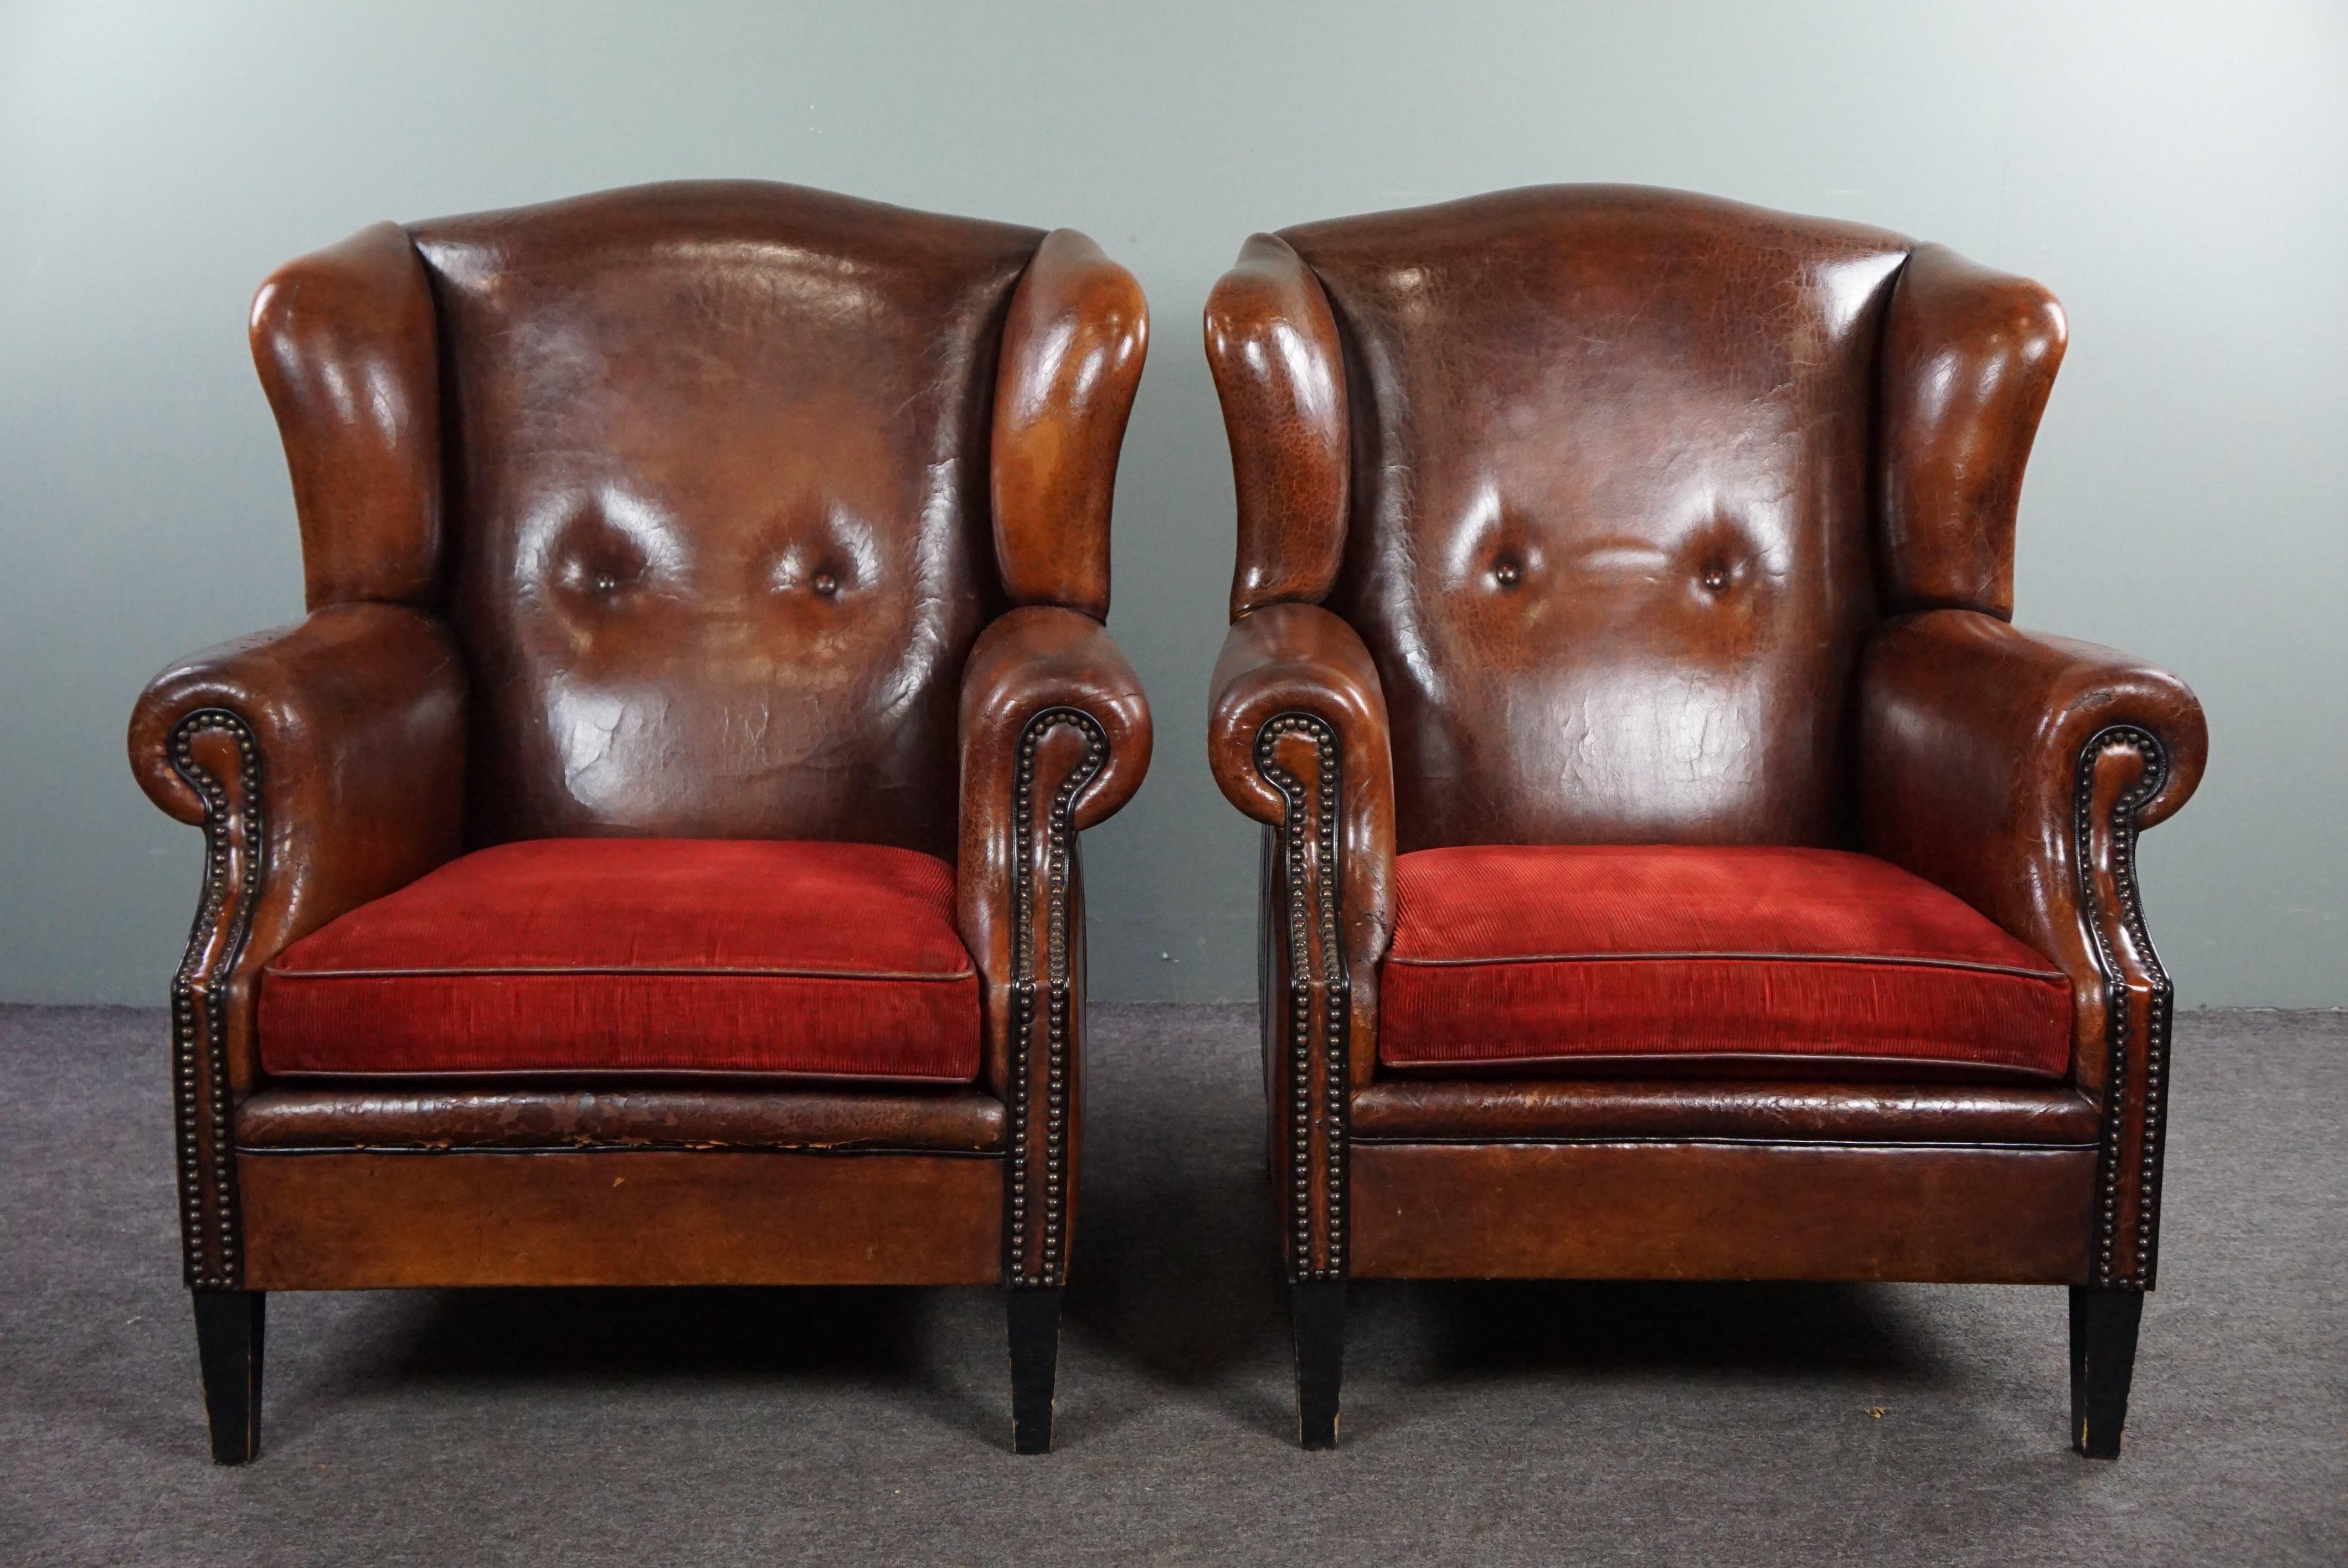 Offered are these sheep leather wing chairs with seat cushions in a beautiful red color.

Imagine yourself in an English country house with these chic wing chairs.
The first thing you notice about these beautiful wing chairs are of course the seat